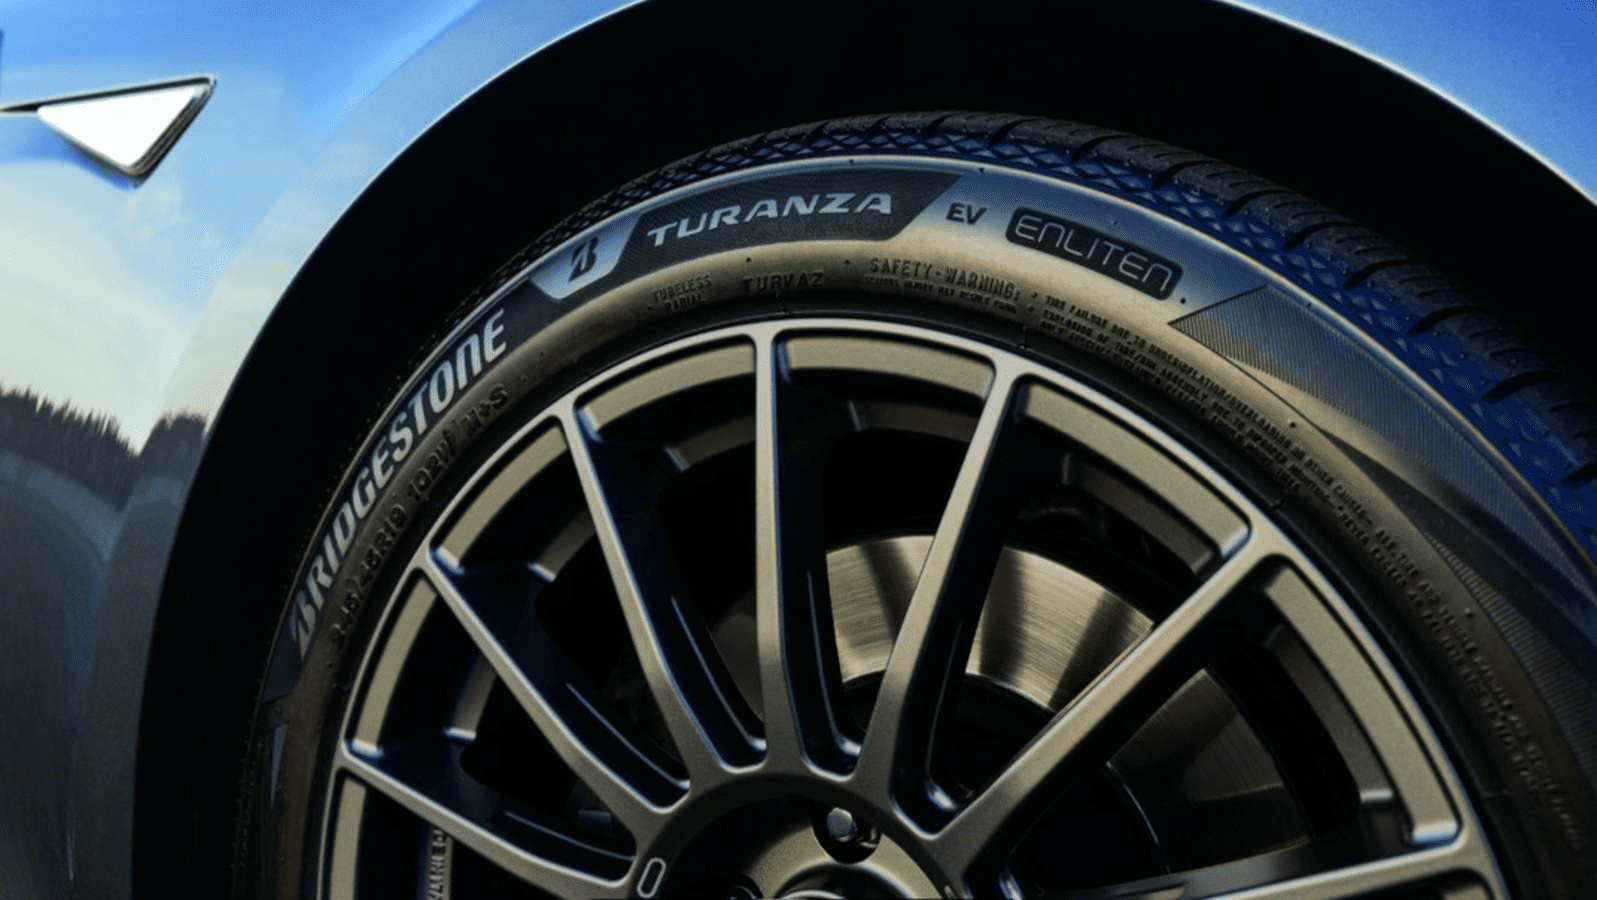 Bridgestone unveils Turanza EV, the game-changer for EV tires, debuted at Electrify Expo Long Beach. Enhanced performance, sustainability, extended wear life.